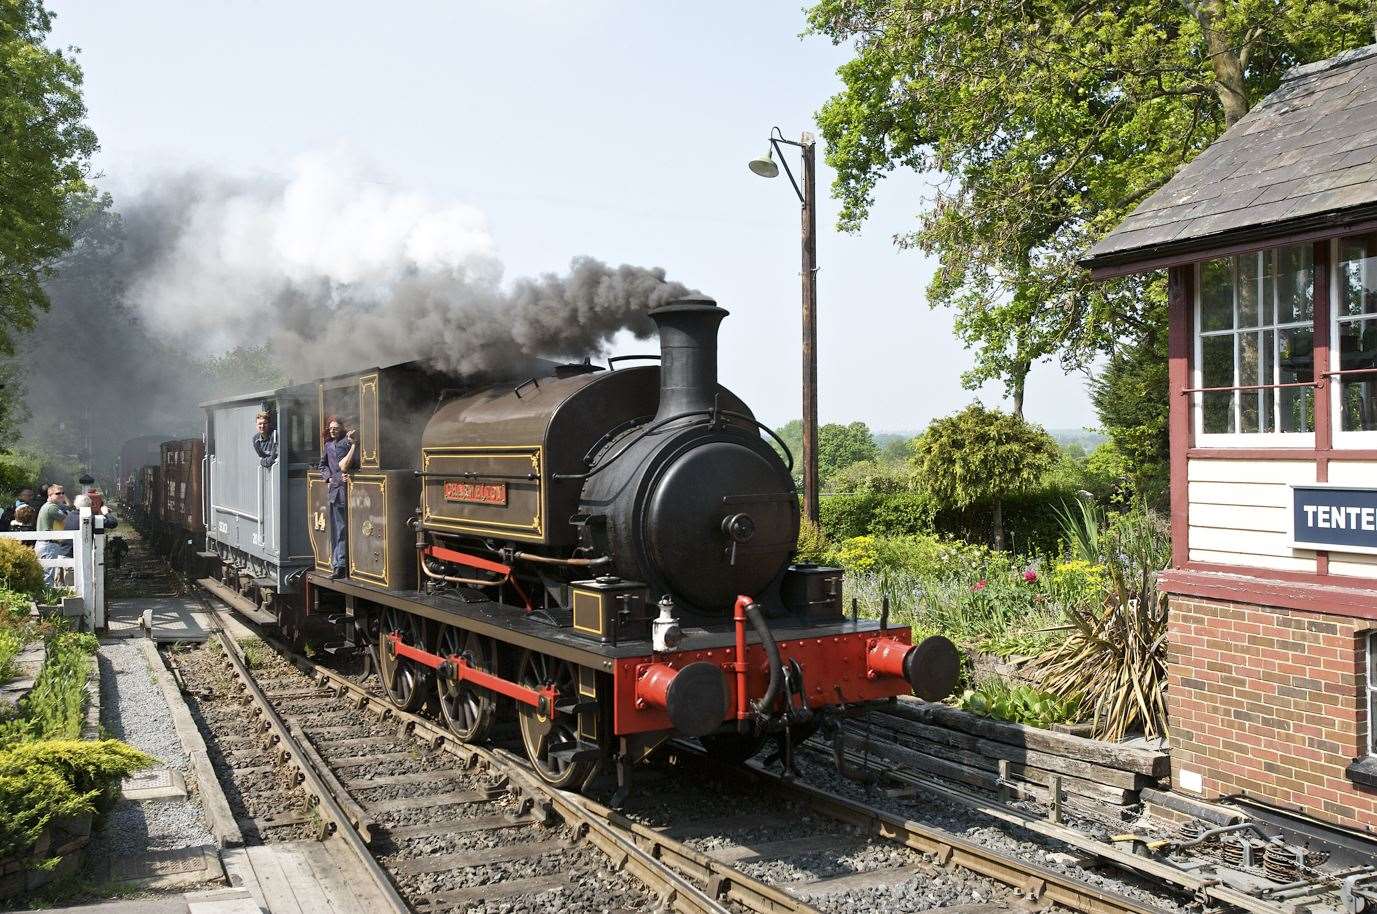 Steam trains on the Kent & East Sussex Railway at Tenterden